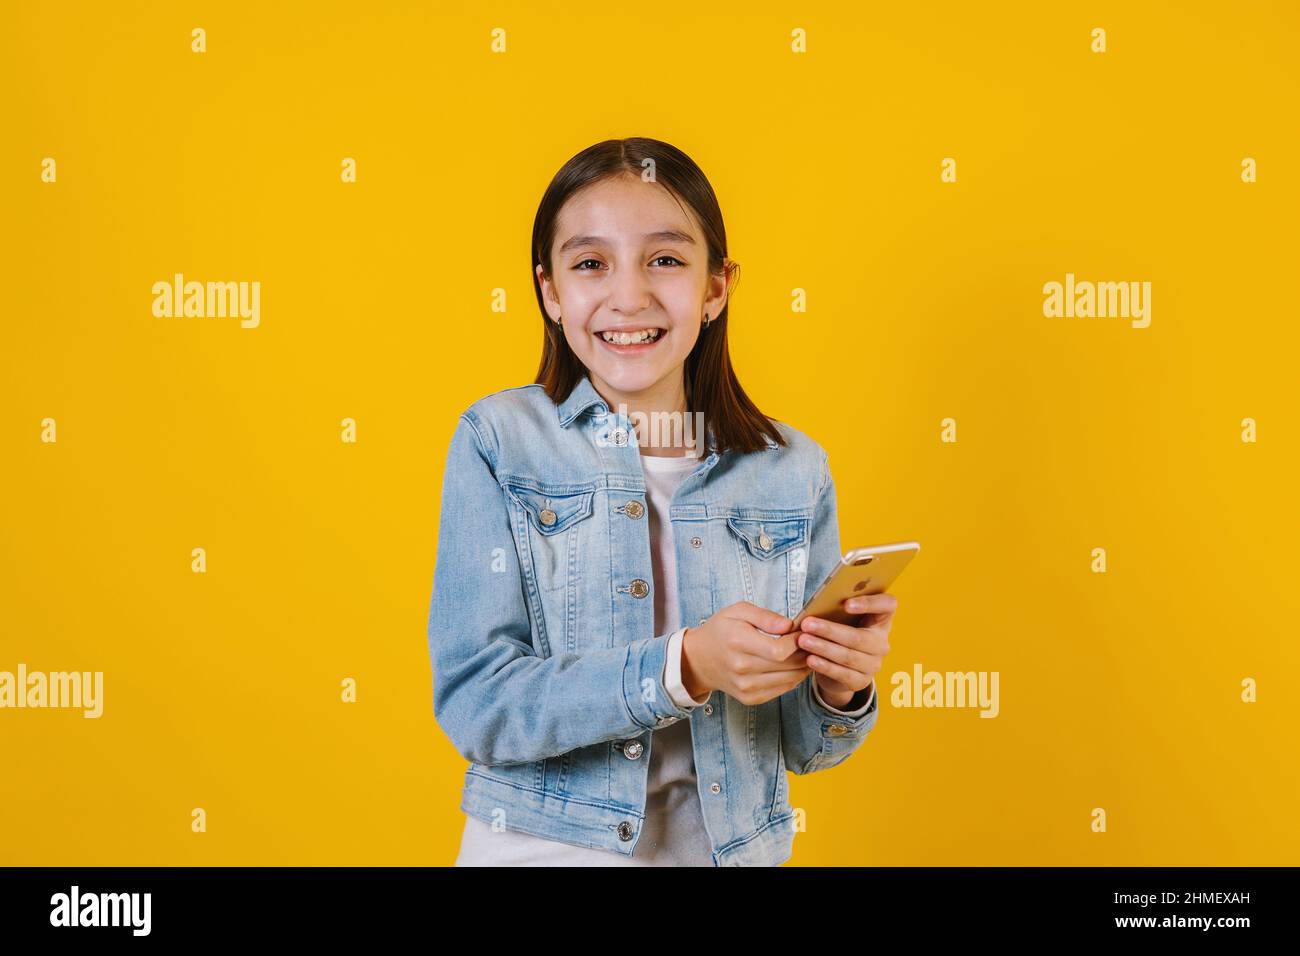 Portrait of latin child girl on yellow background in Mexico Latin America Stock Photo